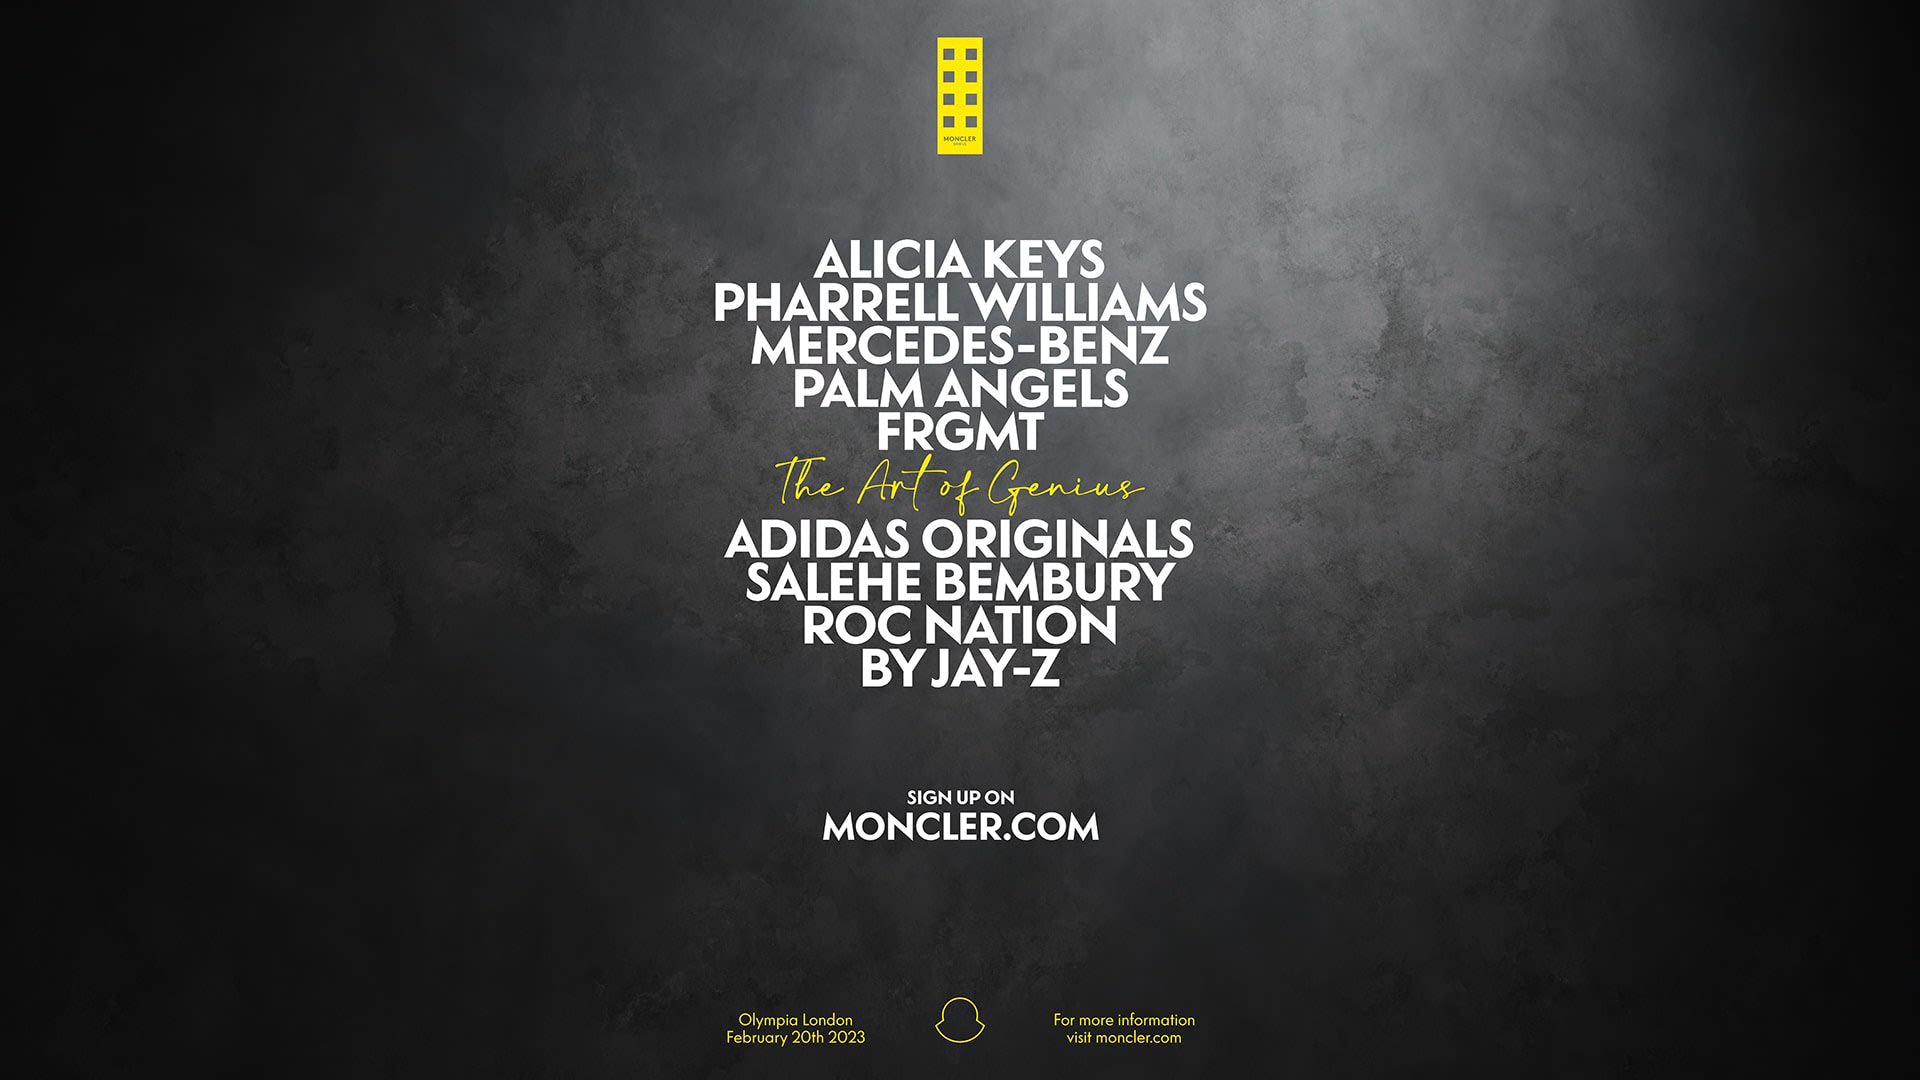 Moncler lineup flyer is pictured